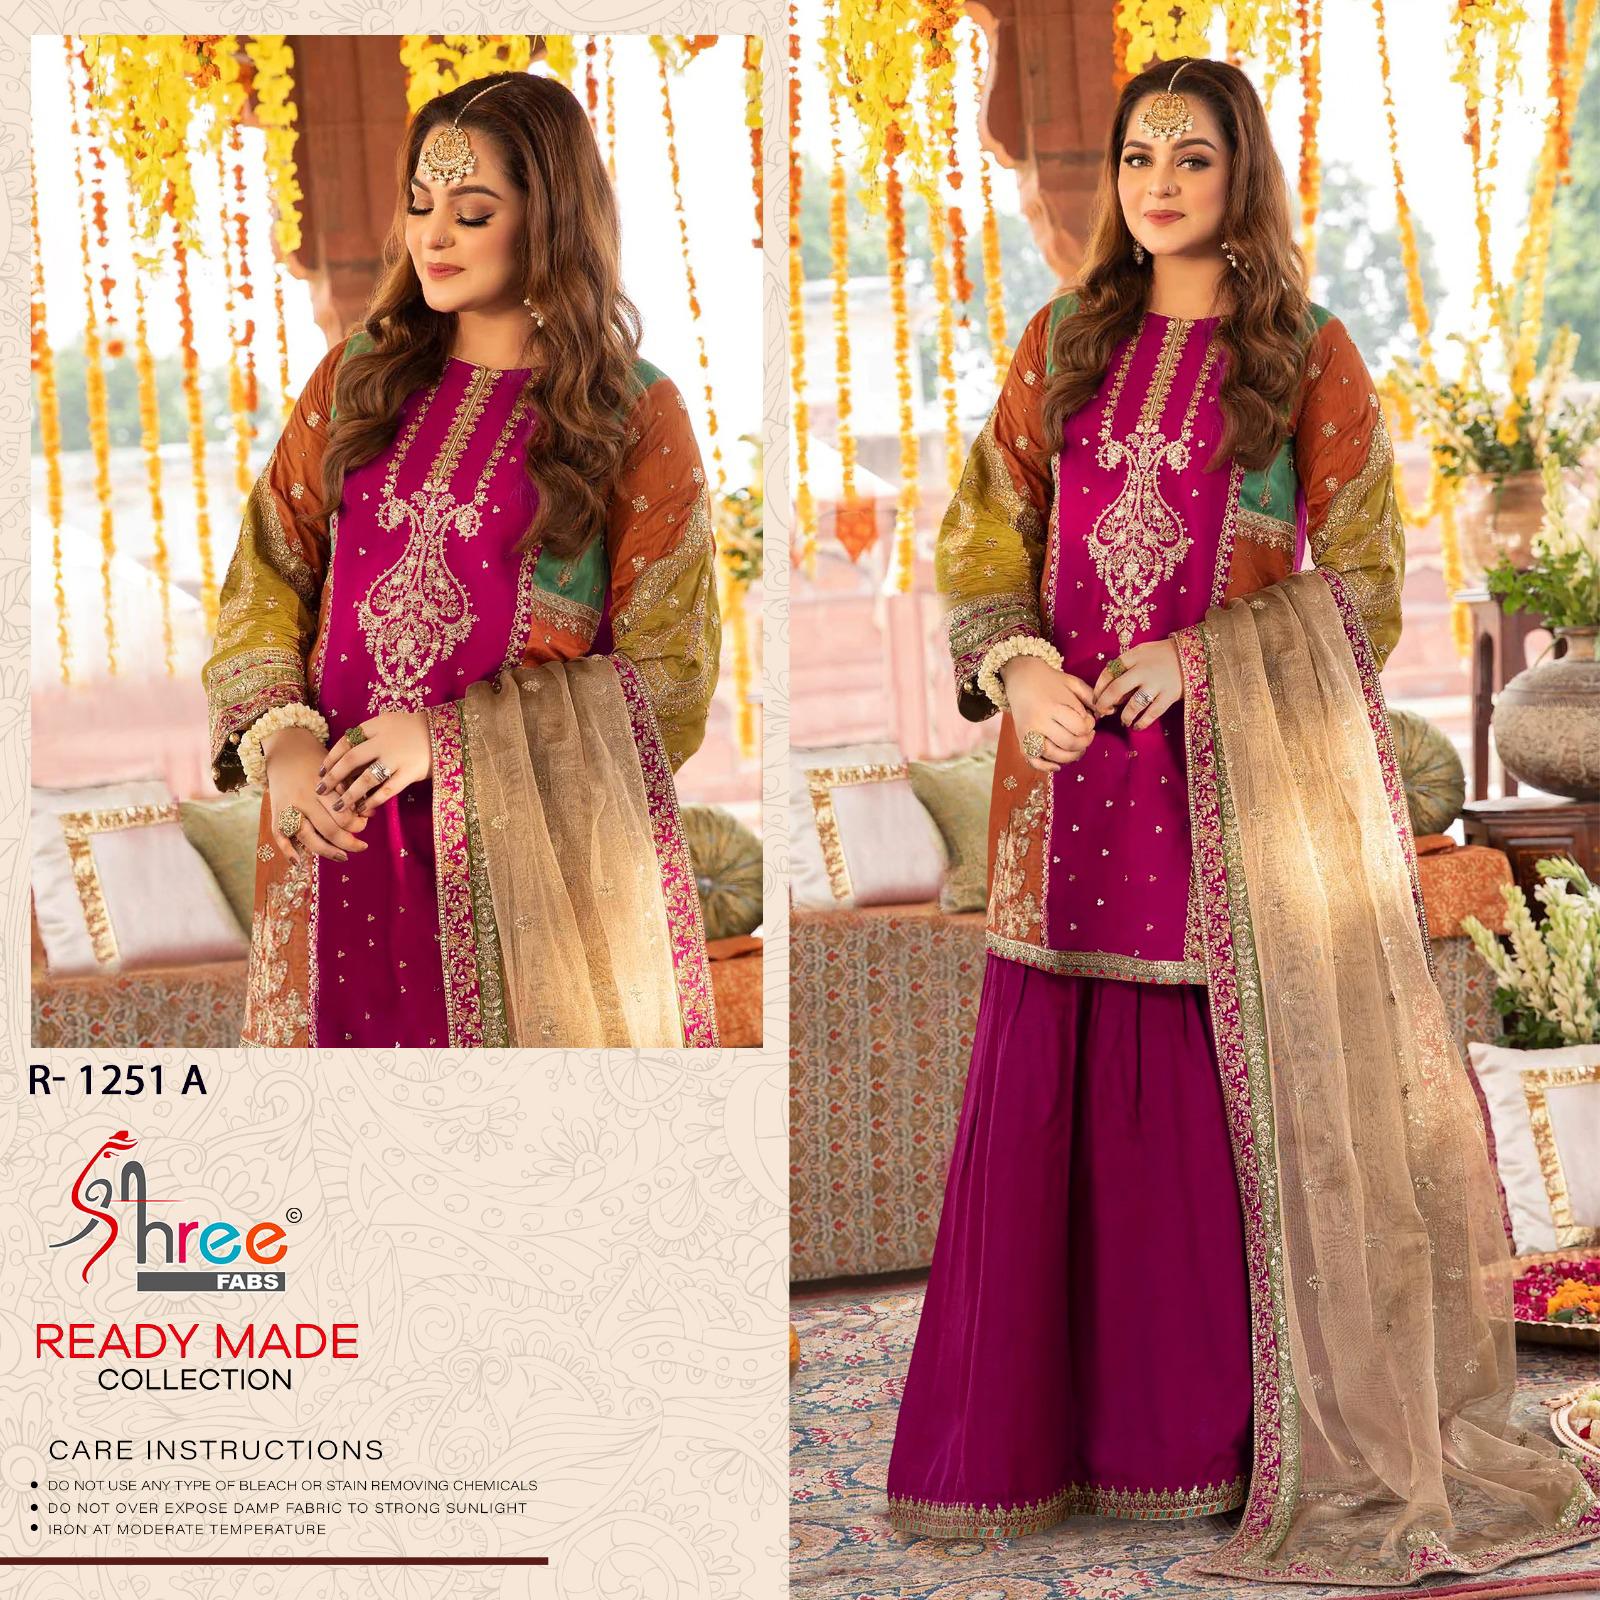 SHREE FAB READY MADE COLLECTION R-1251-A